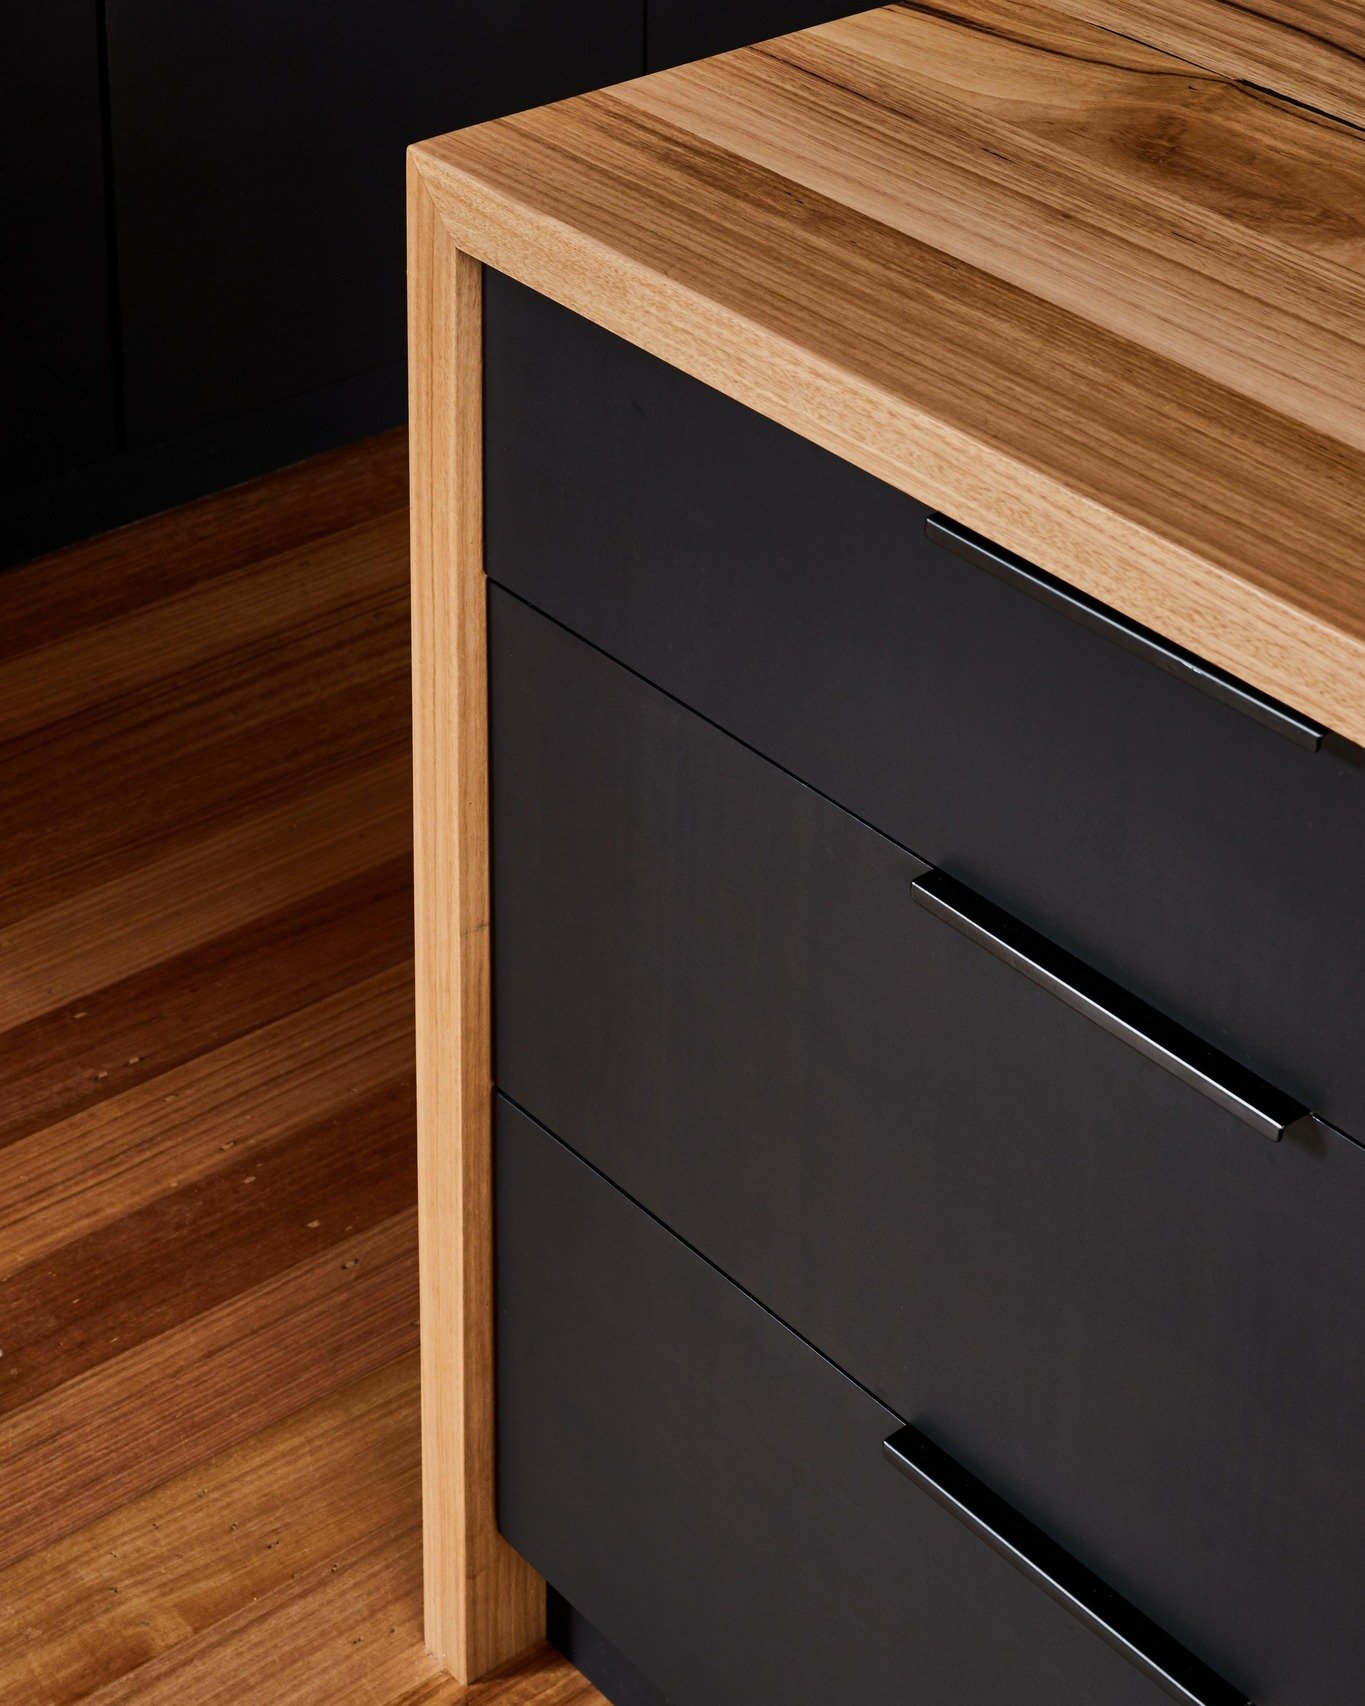 Real timber bench tops and black cabinetry.... a perfect match!